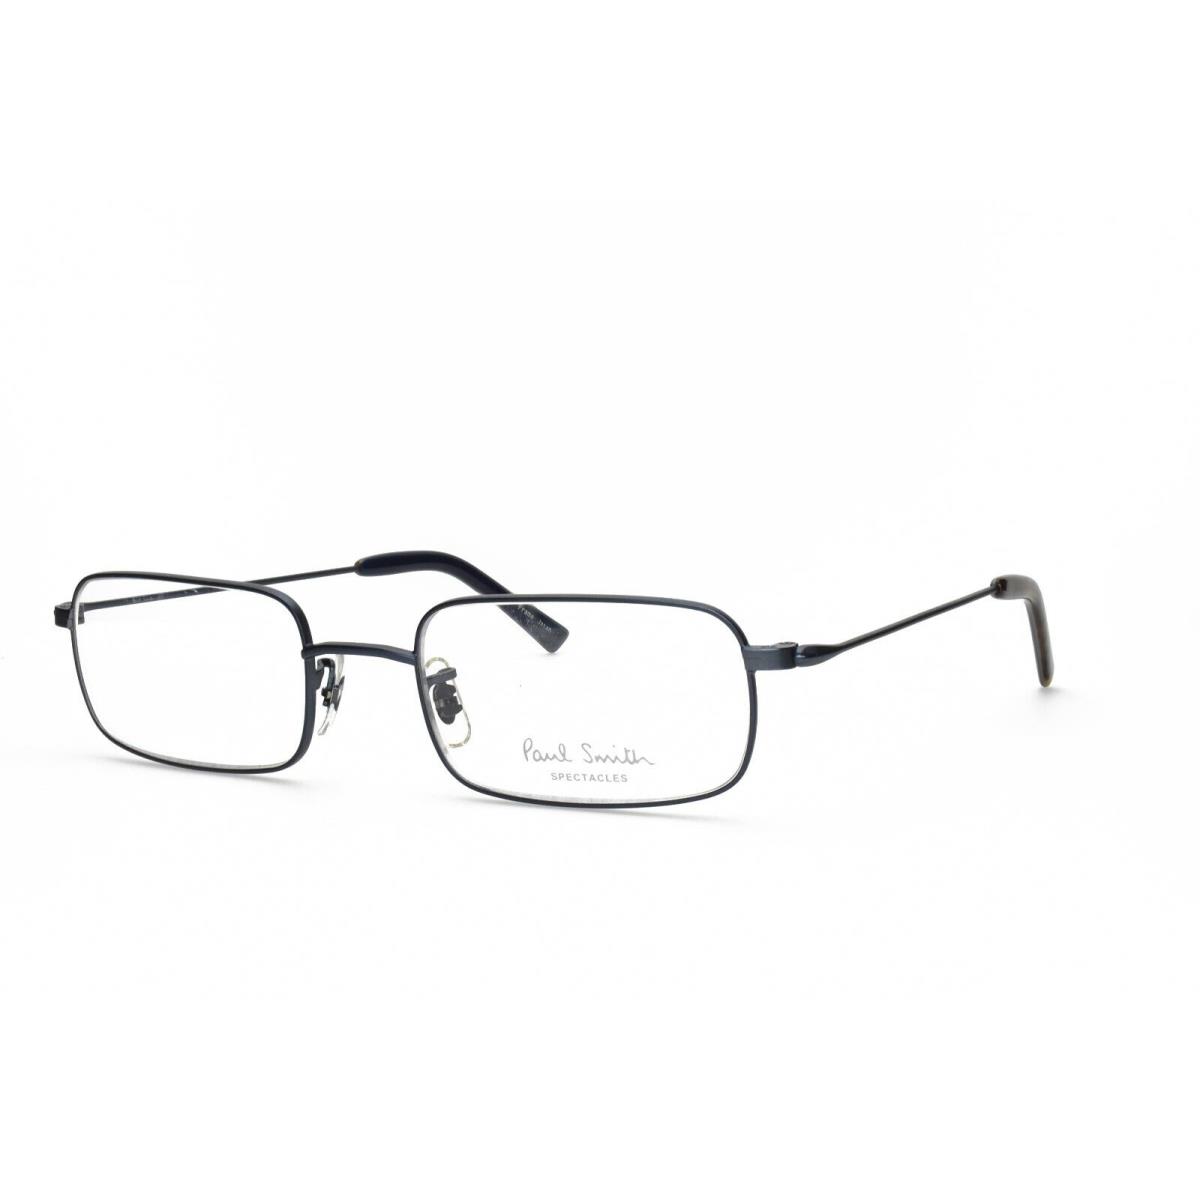 Paul Smith PS 160 IN Eyeglasses Frames Only 51-19-145